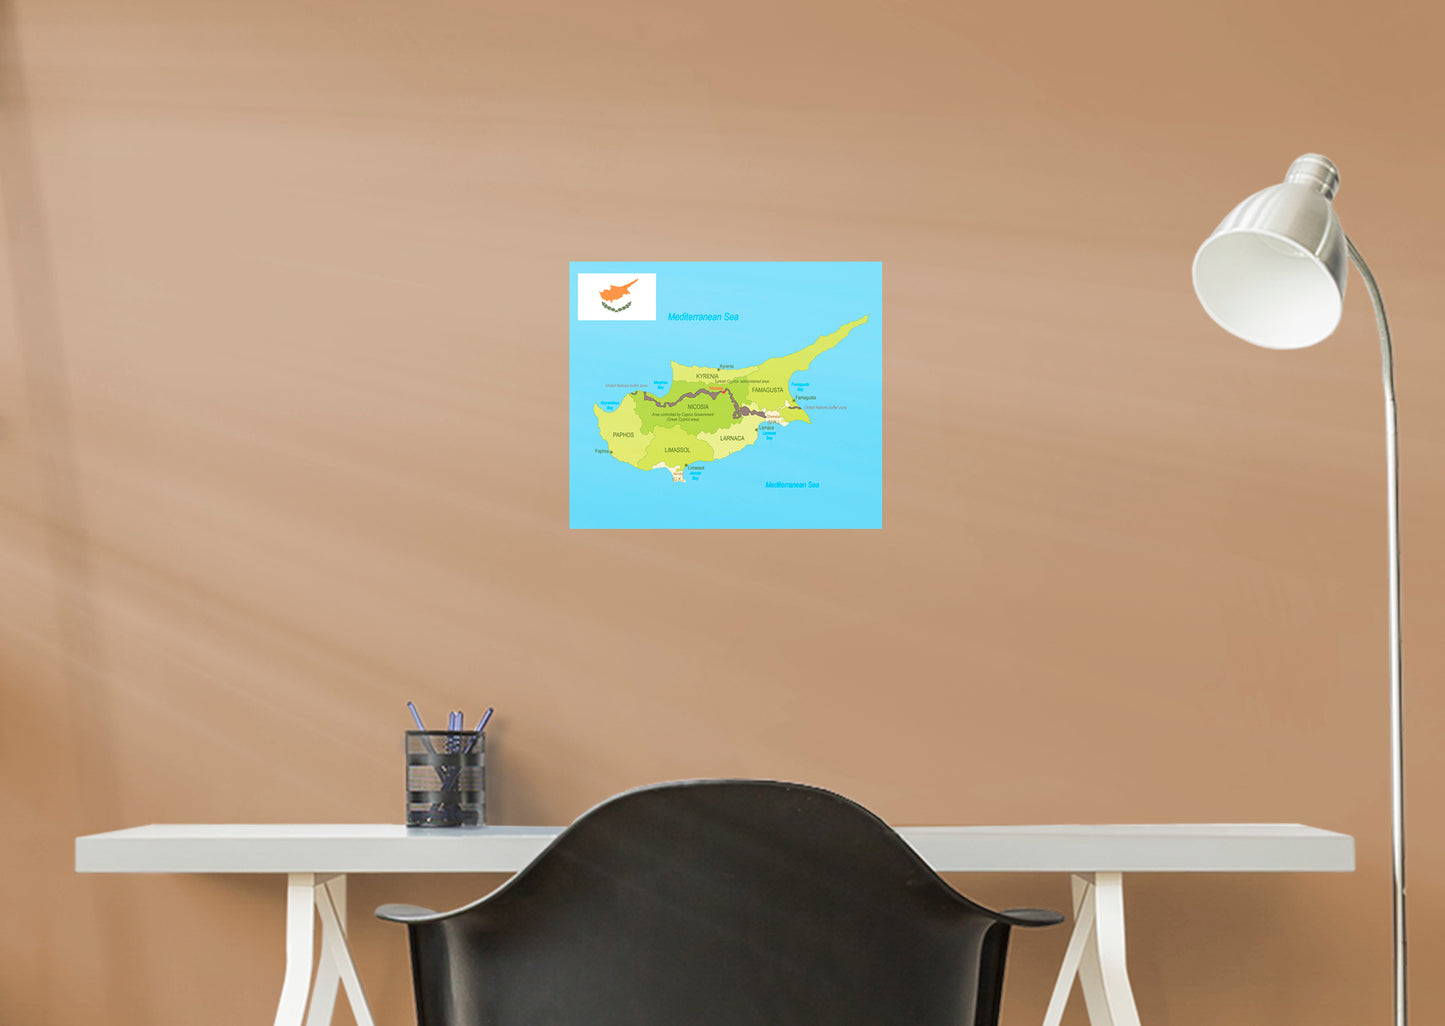 Maps of Europe: Cyprus Mural        -   Removable Wall   Adhesive Decal